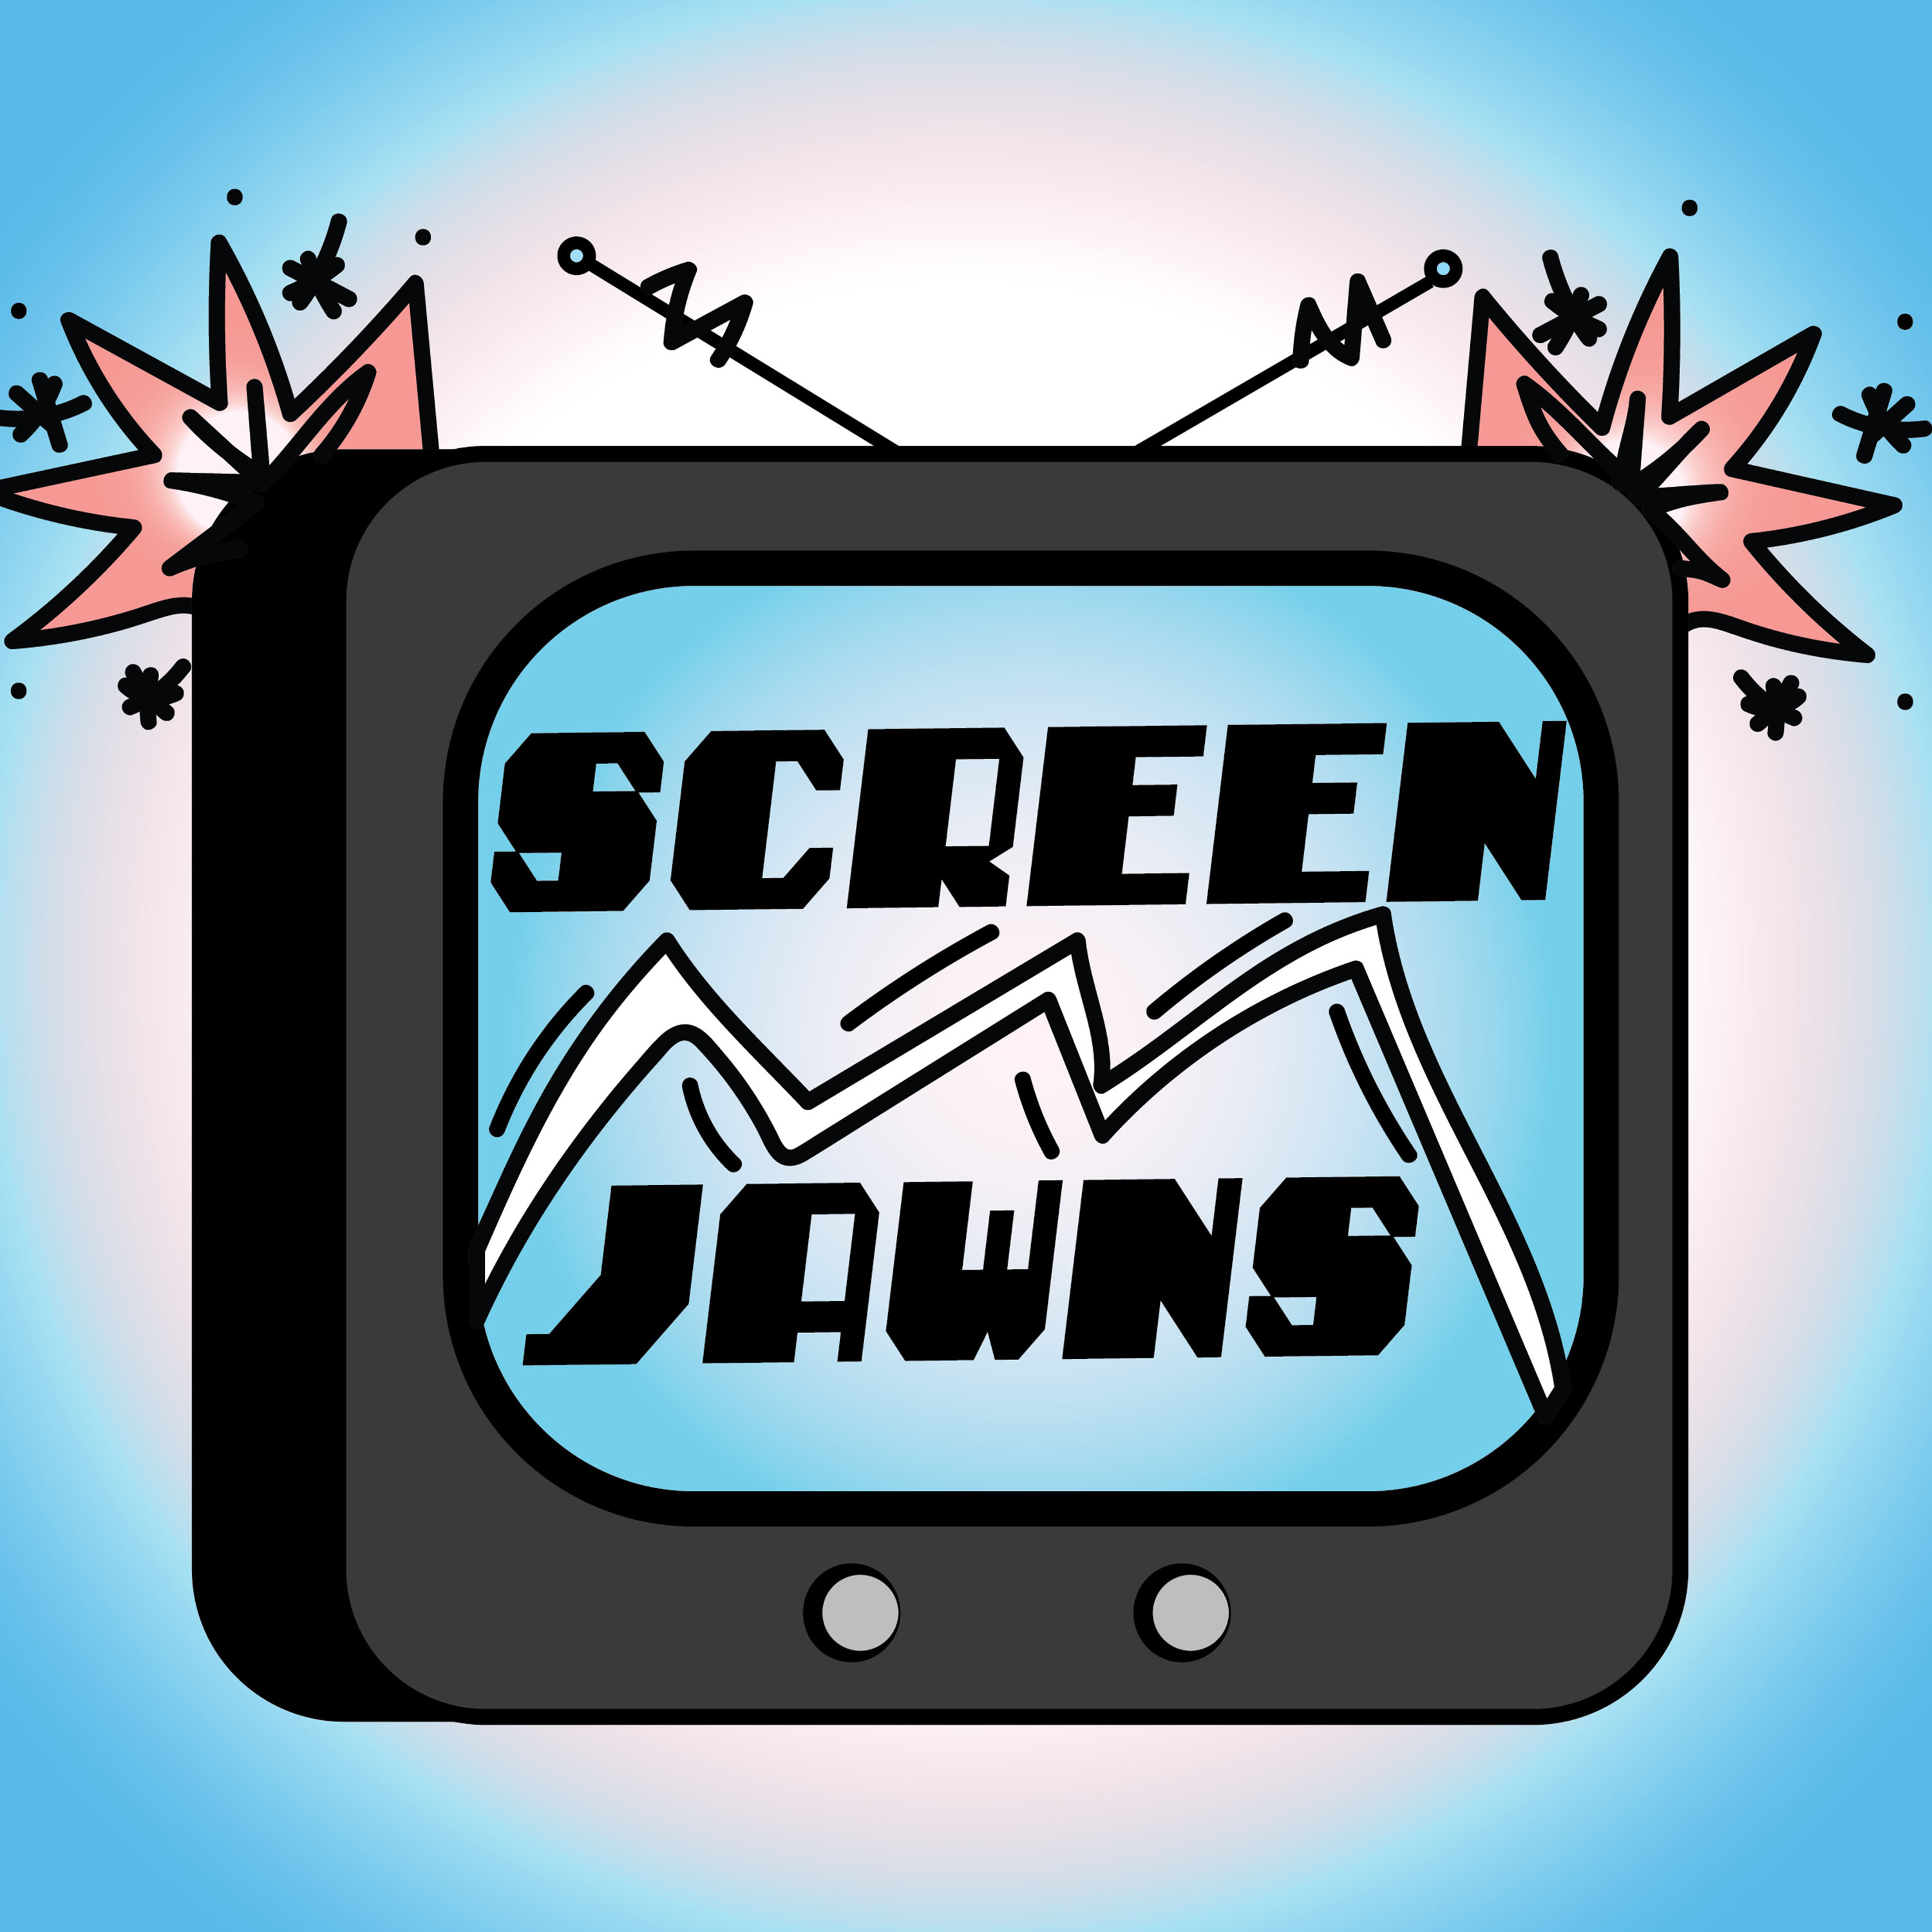 Artwork for podcast Screen Jawns